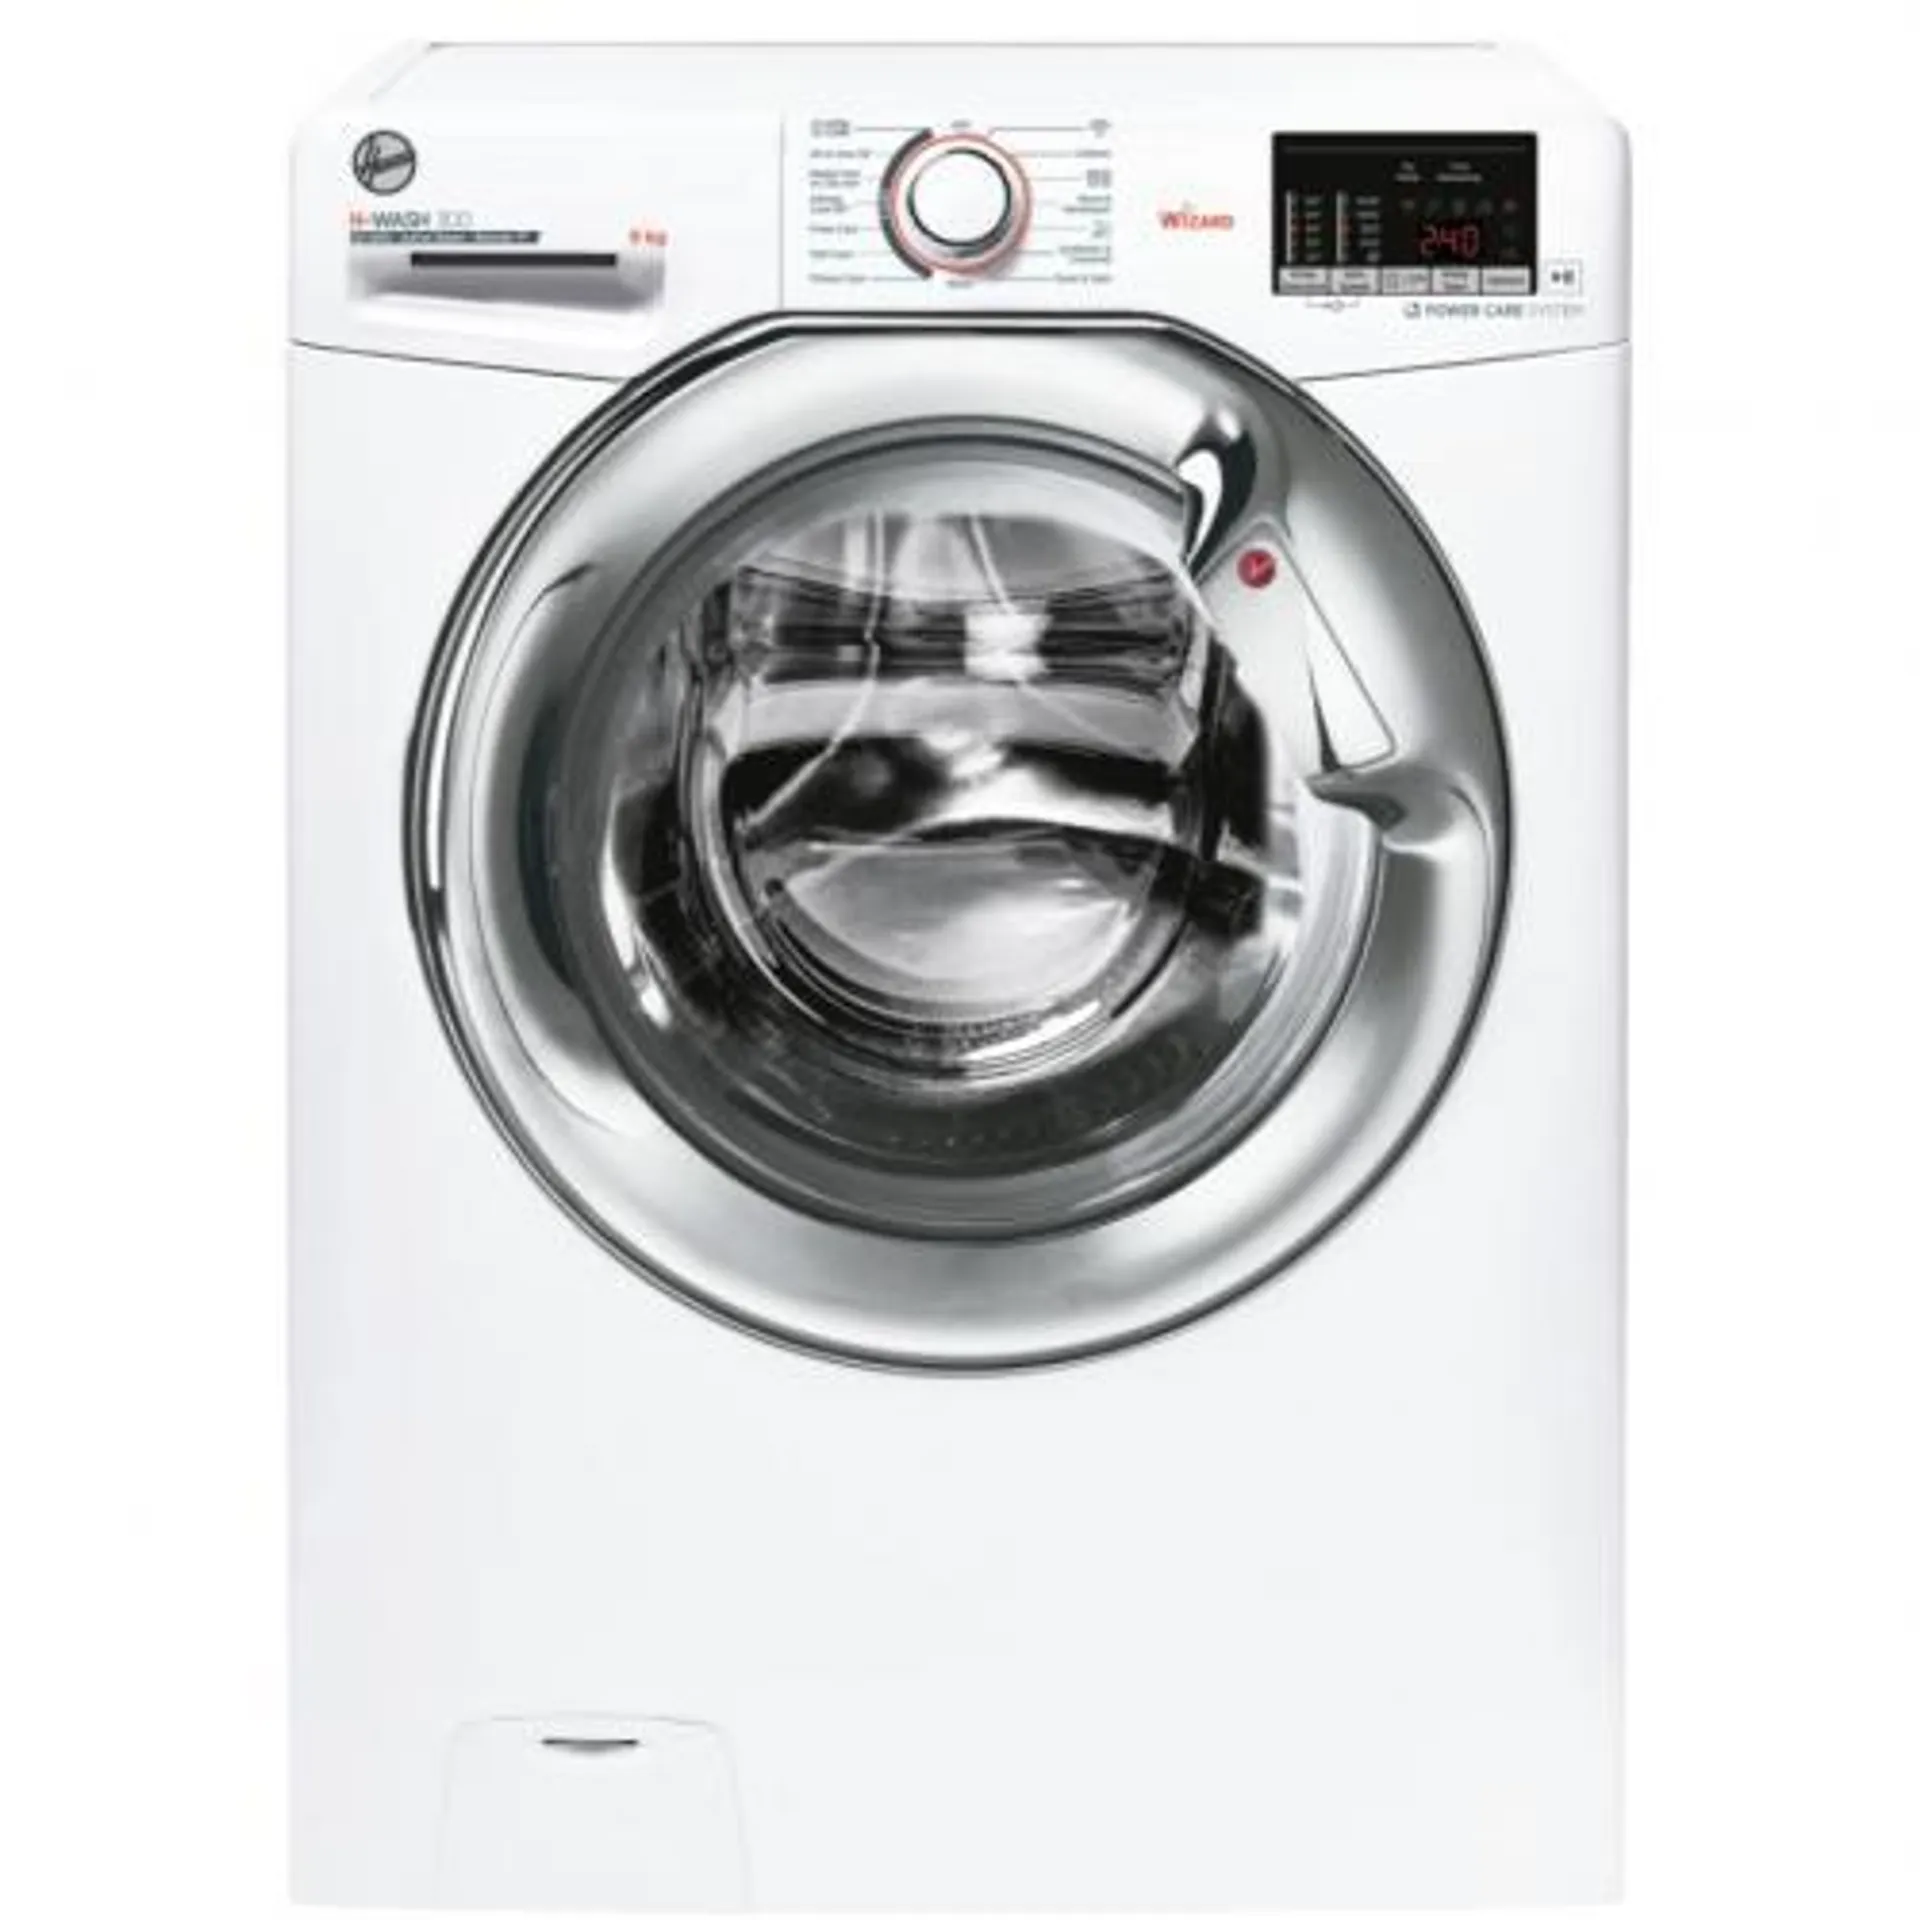 HOOVER 9KG C RATED 1400 SPIN WASHING MACHINE